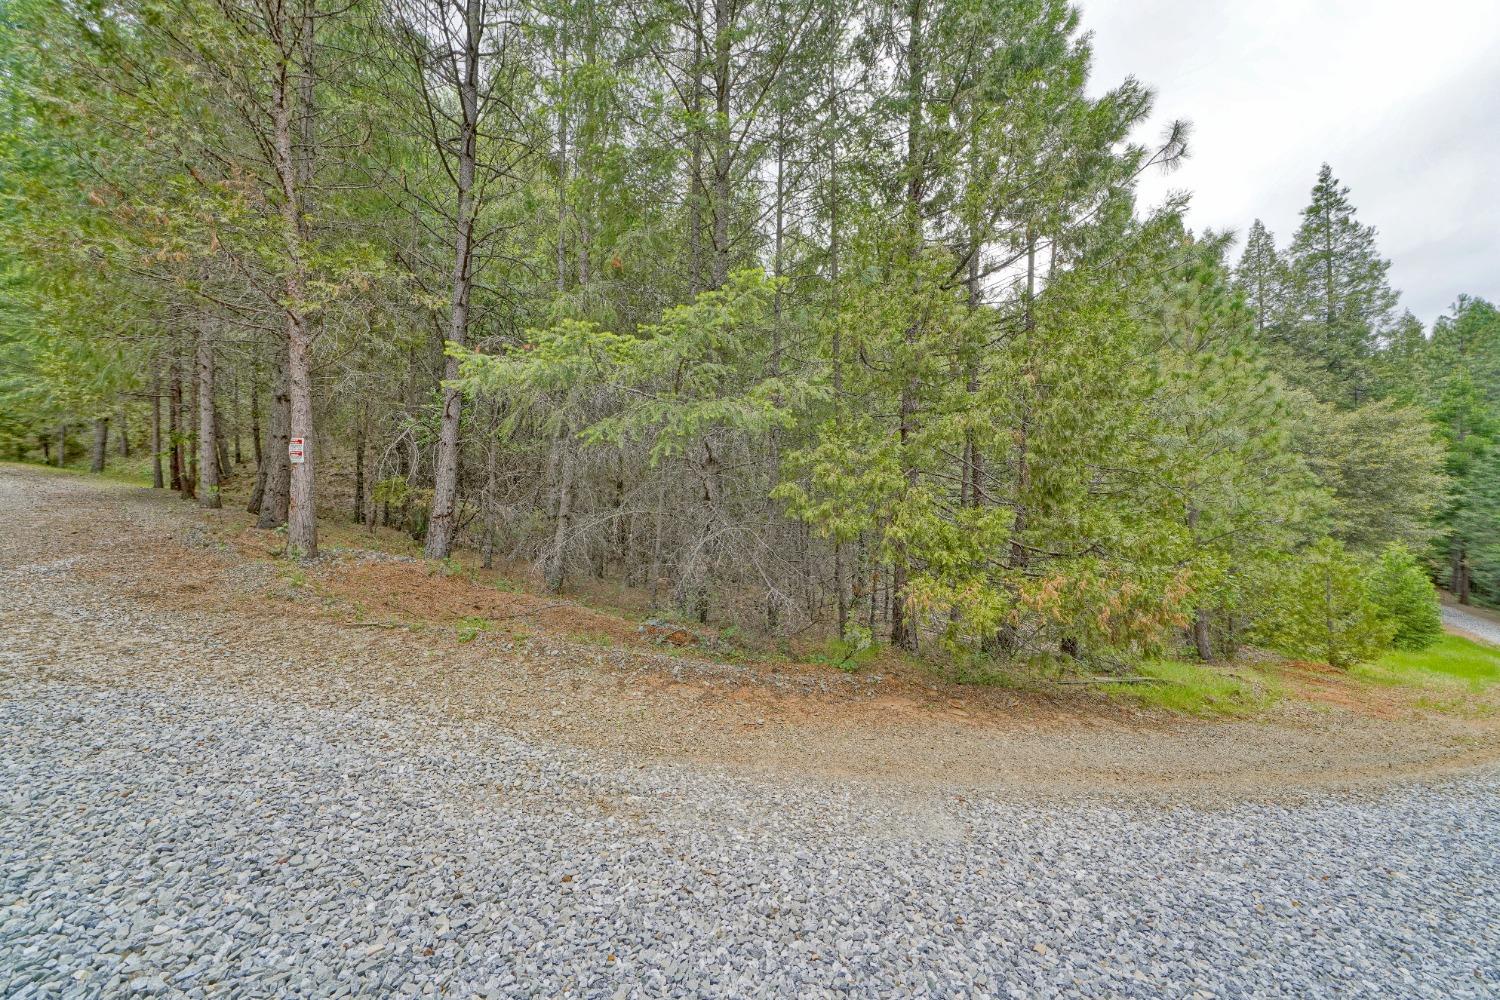 Thinking of building a home and want a peaceful setting? This parcel is located in the small Gold Strike subdivision on GLORY HOLE RD In beautiful Camino. Just minutes to Apple Hill without the traffic, 15 minutes to Placerville, minutes to many award winning wineries and about 1 hour to Tahoe!